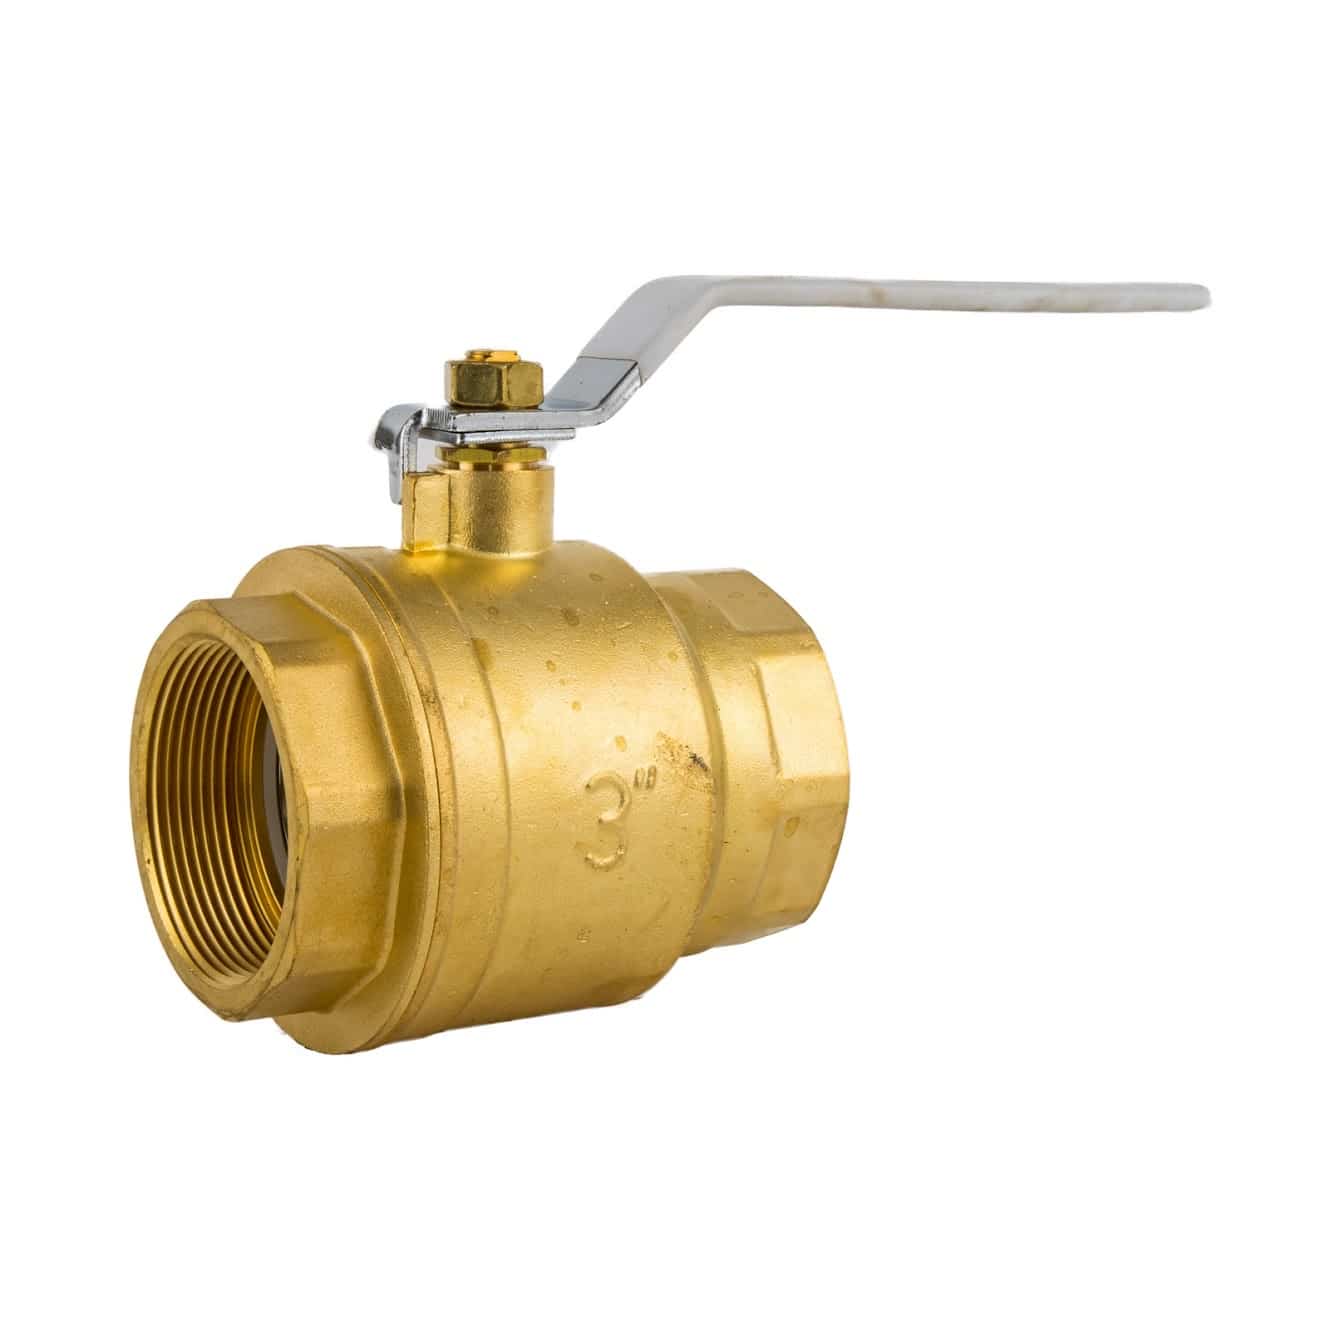 3-inch Full Port Brass Ball Valve - Landscape Products Inc.